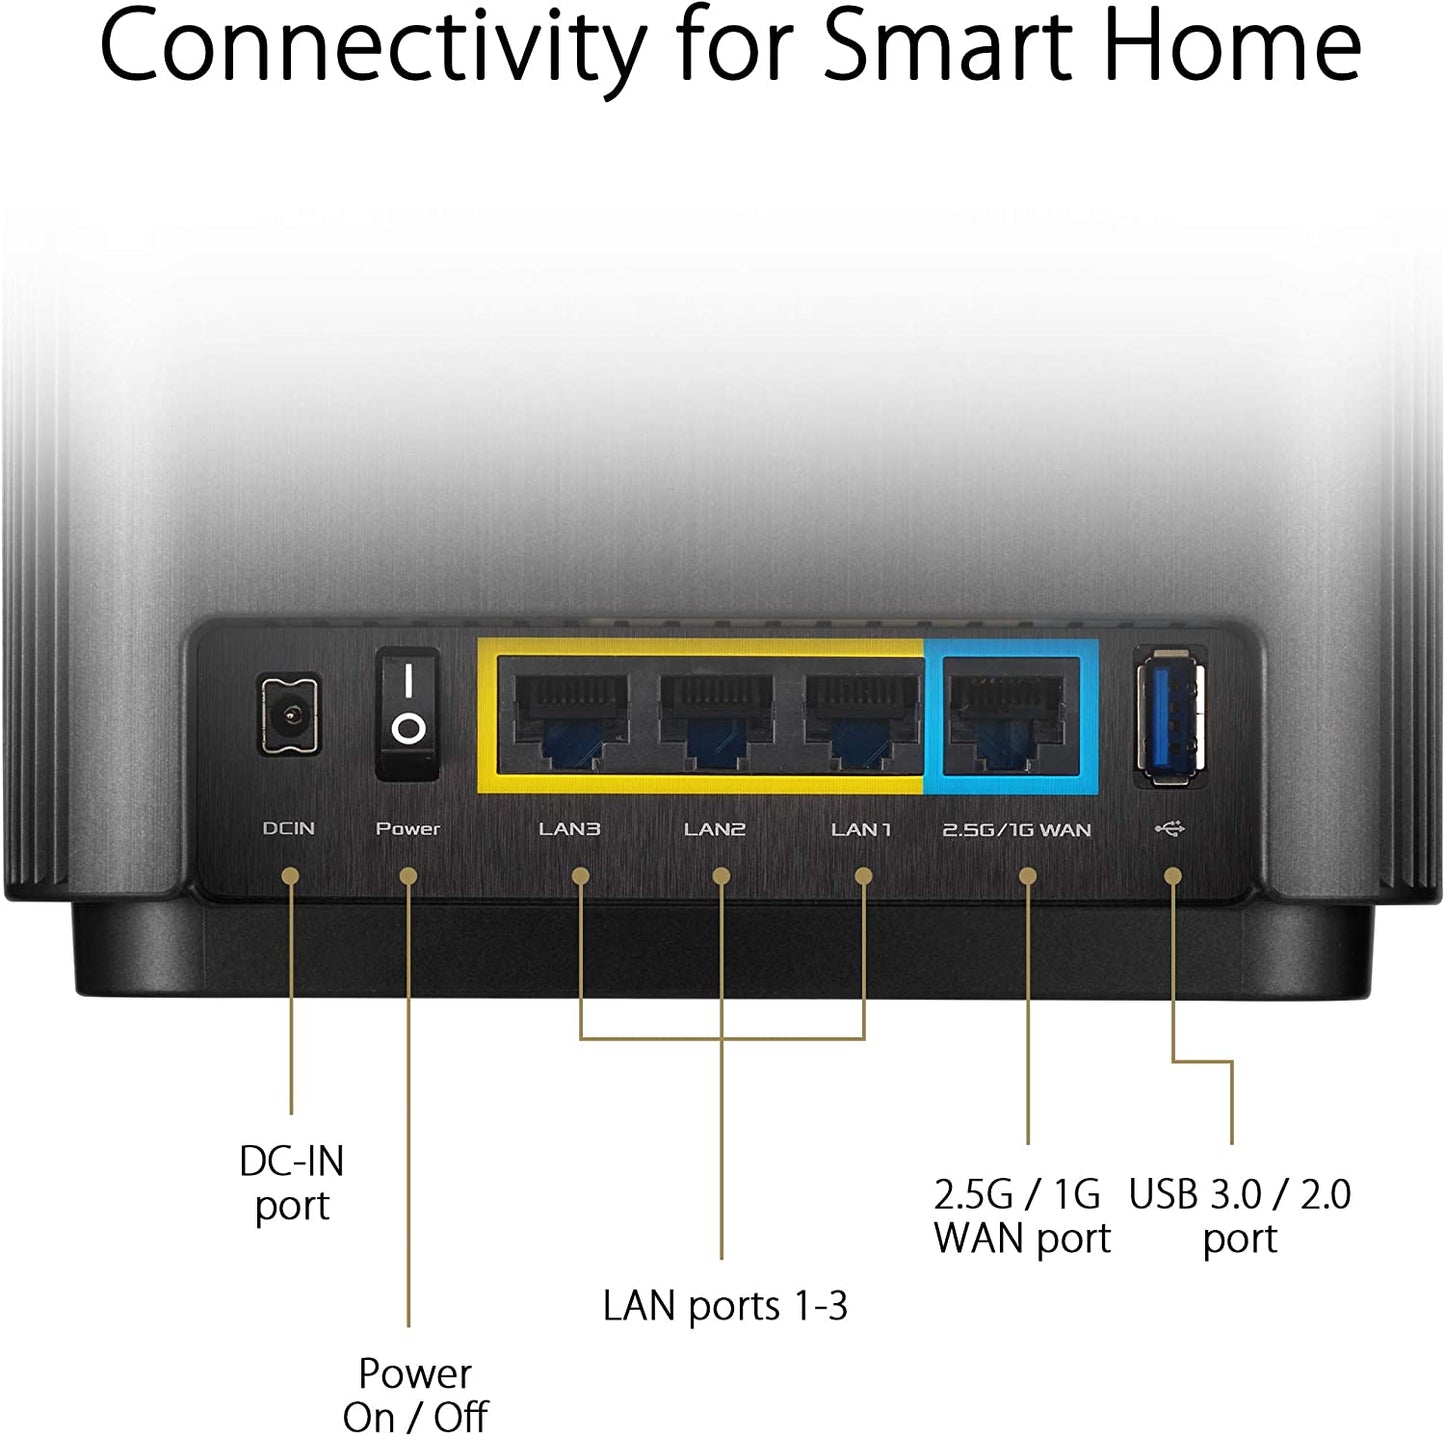 Zenwifi AX6600 Tri-Band Mesh Wifi 6 System (XT8 2PK) - Whole Home Coverage up to 5500 Sq.Ft & 6+ Rooms, Aimesh, Included Lifetime Internet Security, Easy Setup, 3 SSID, Parental Control, White